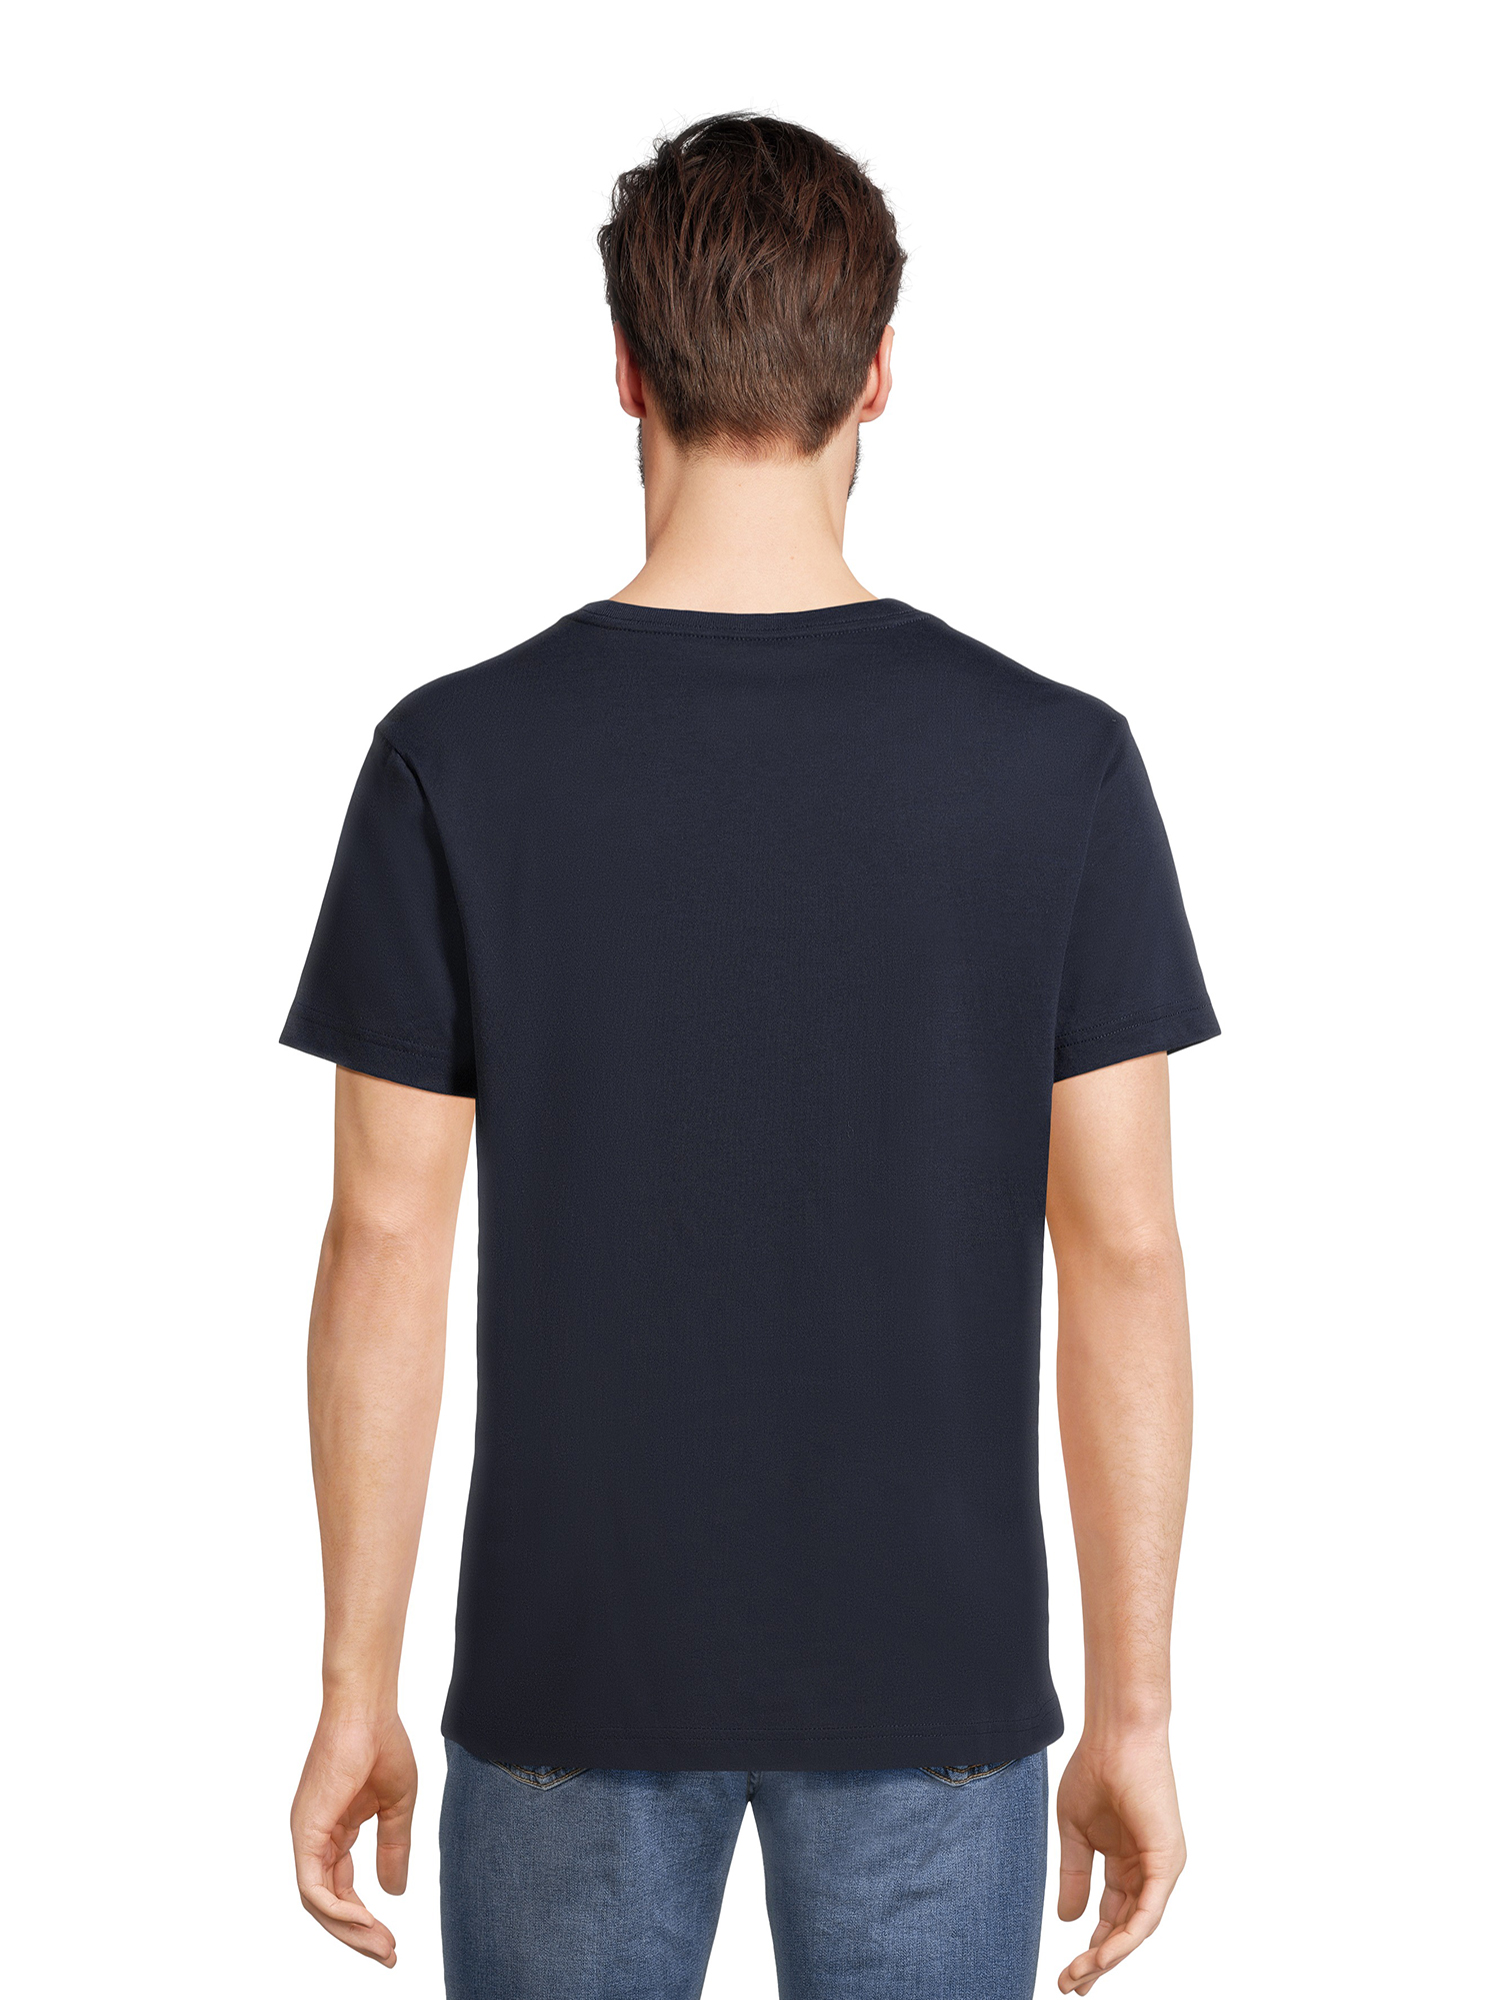 George Men's & Big Men's Crewneck Tee with Short Sleeves, Sizes XS-3XL - image 3 of 6